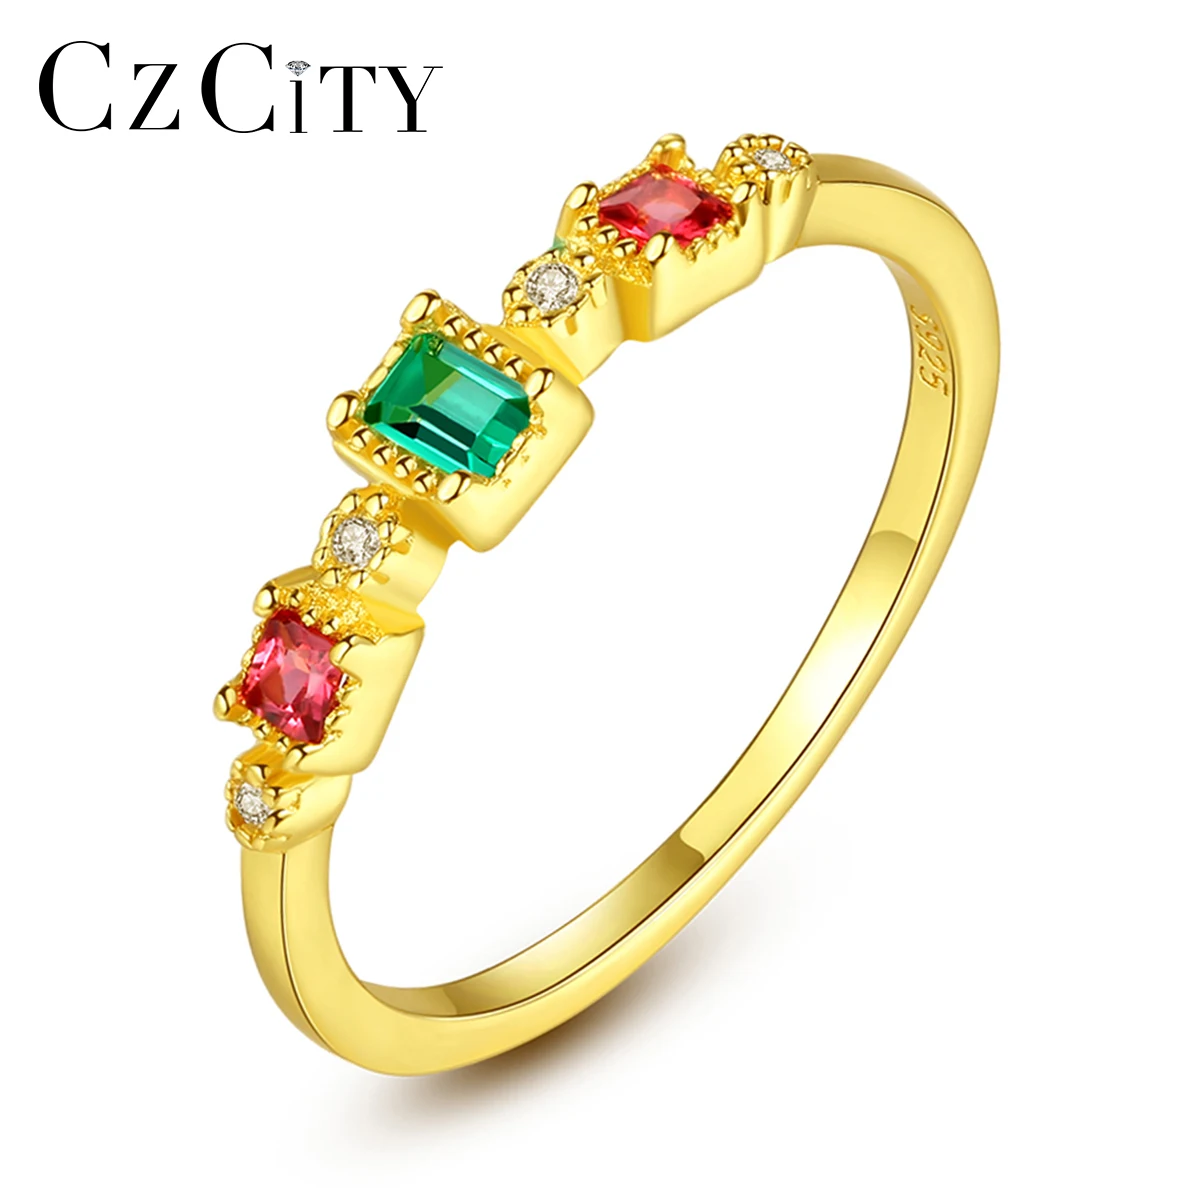 

CZCITY New Luxury Topaz Gemstone Round Rings for Women Wedding Engagement Fine Jewelry 925 Sterling Silver 18k Gold Plated Gifts